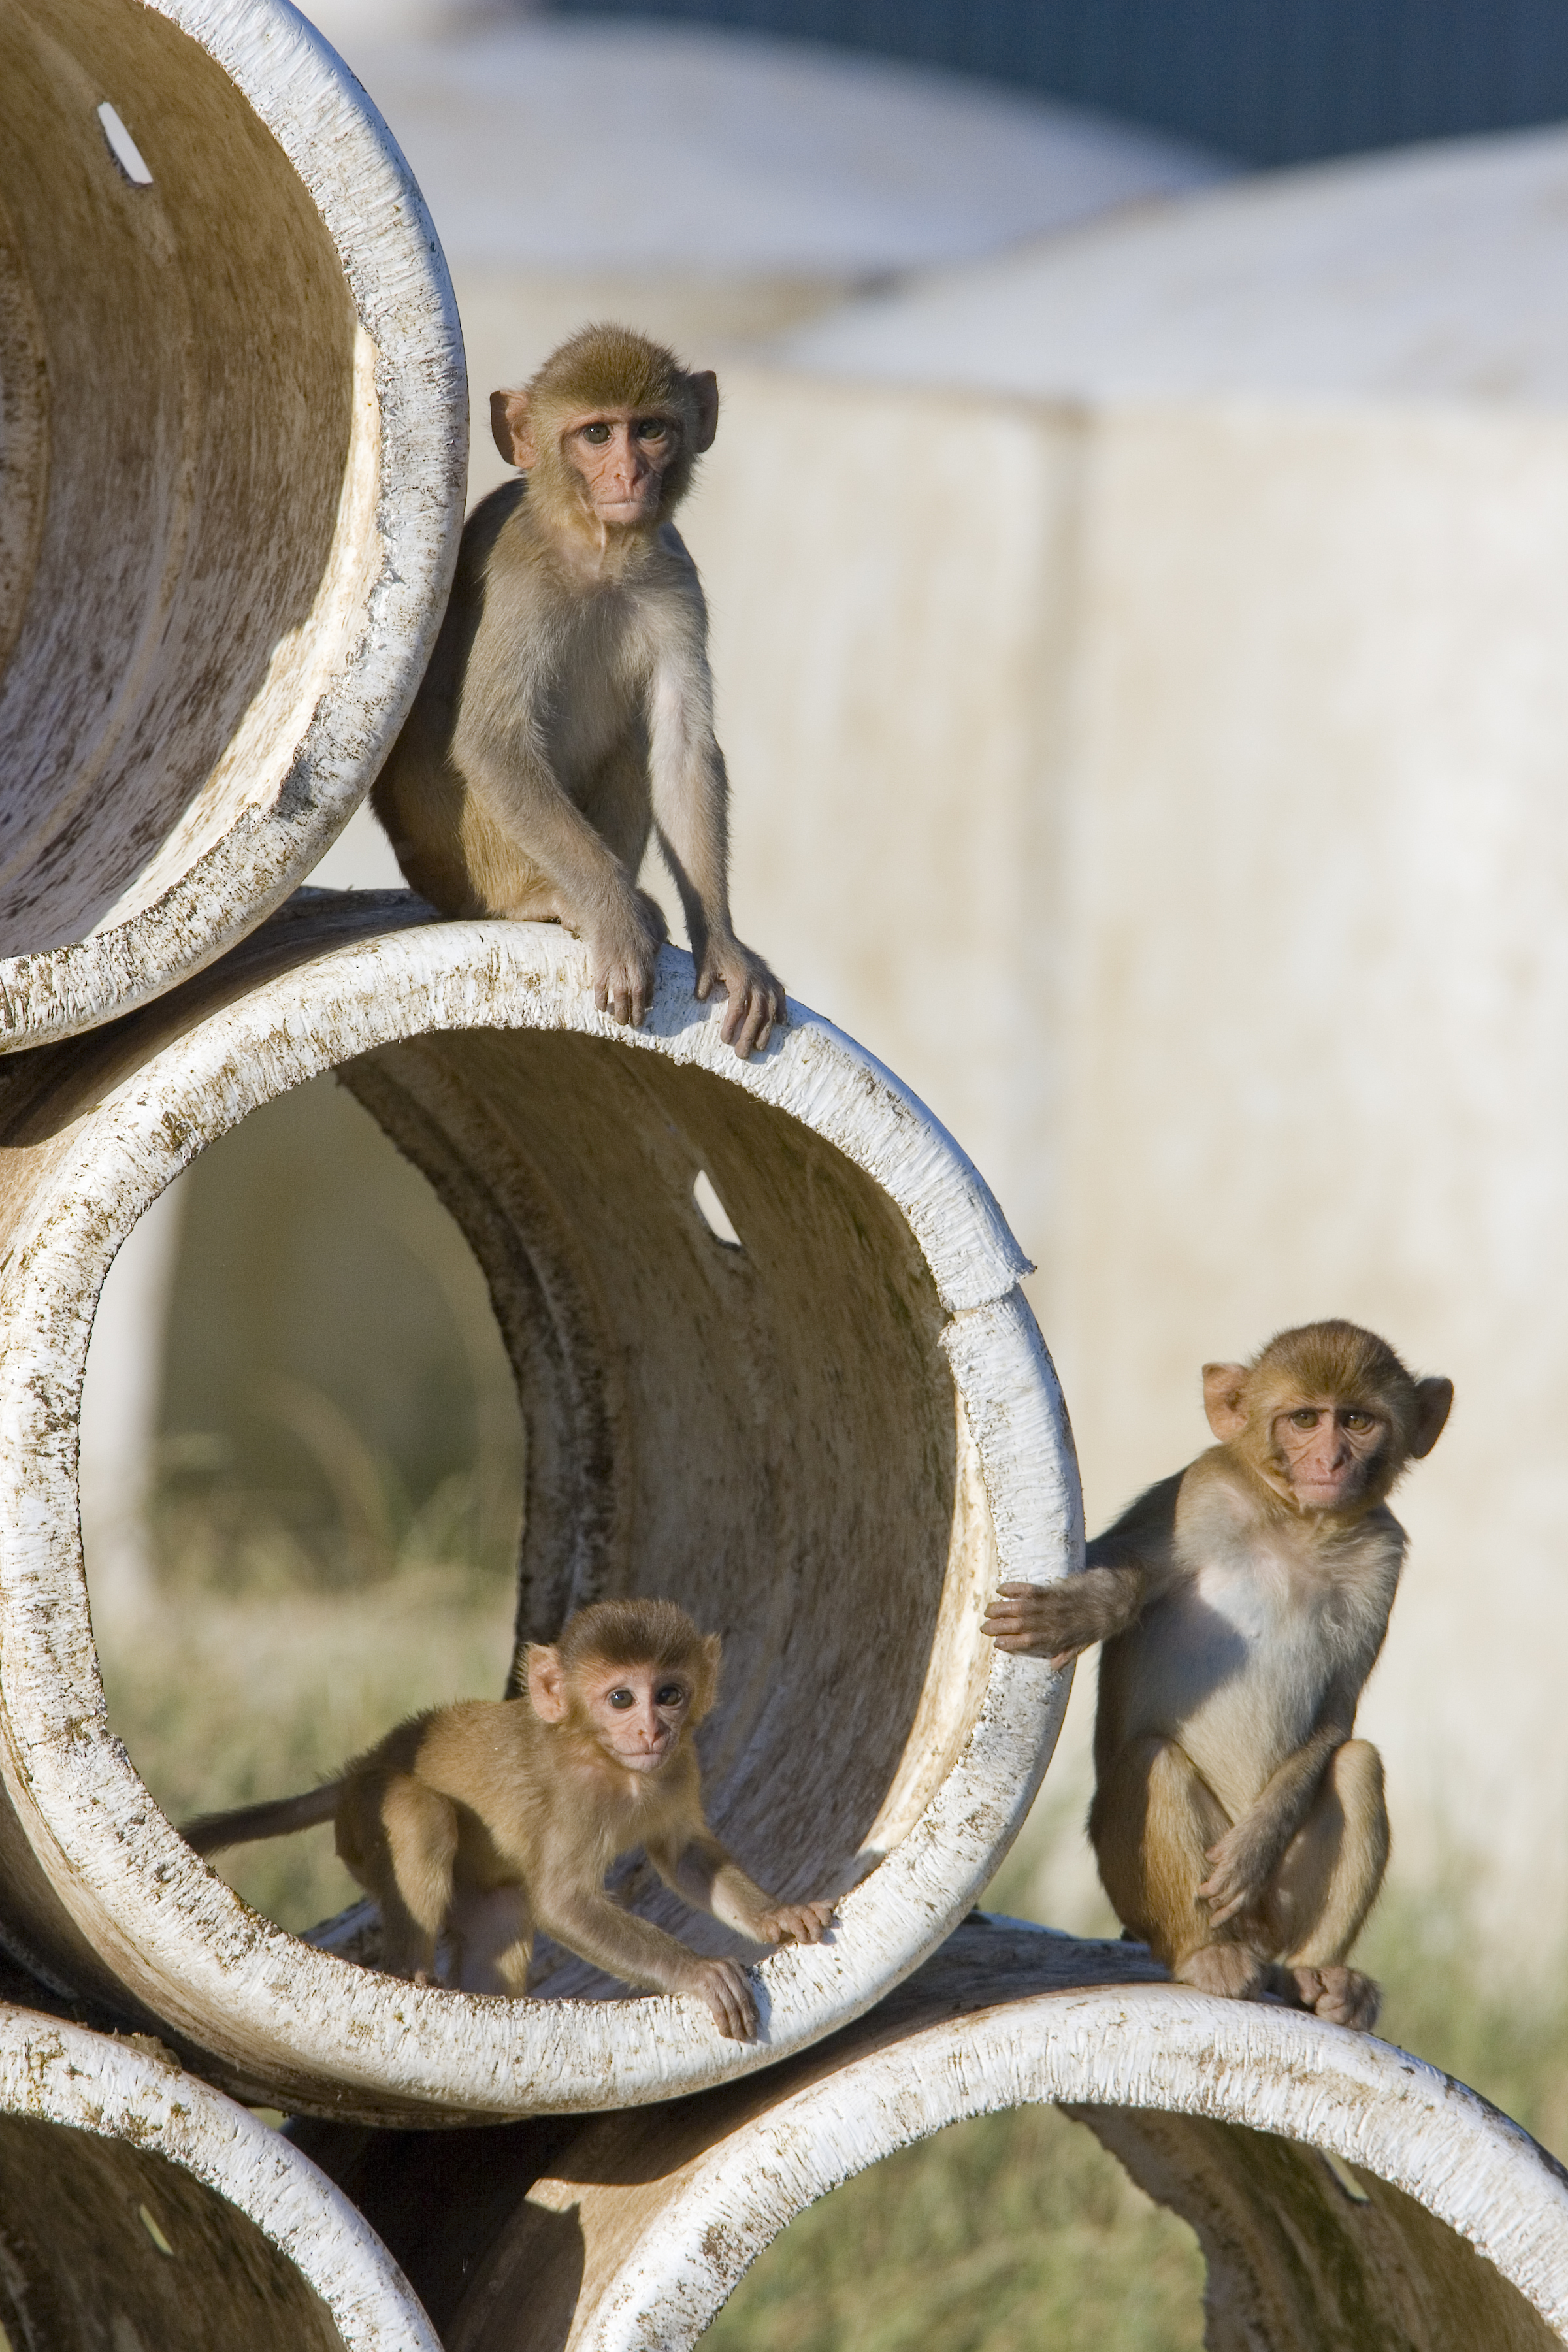 Rhesus on tube structures